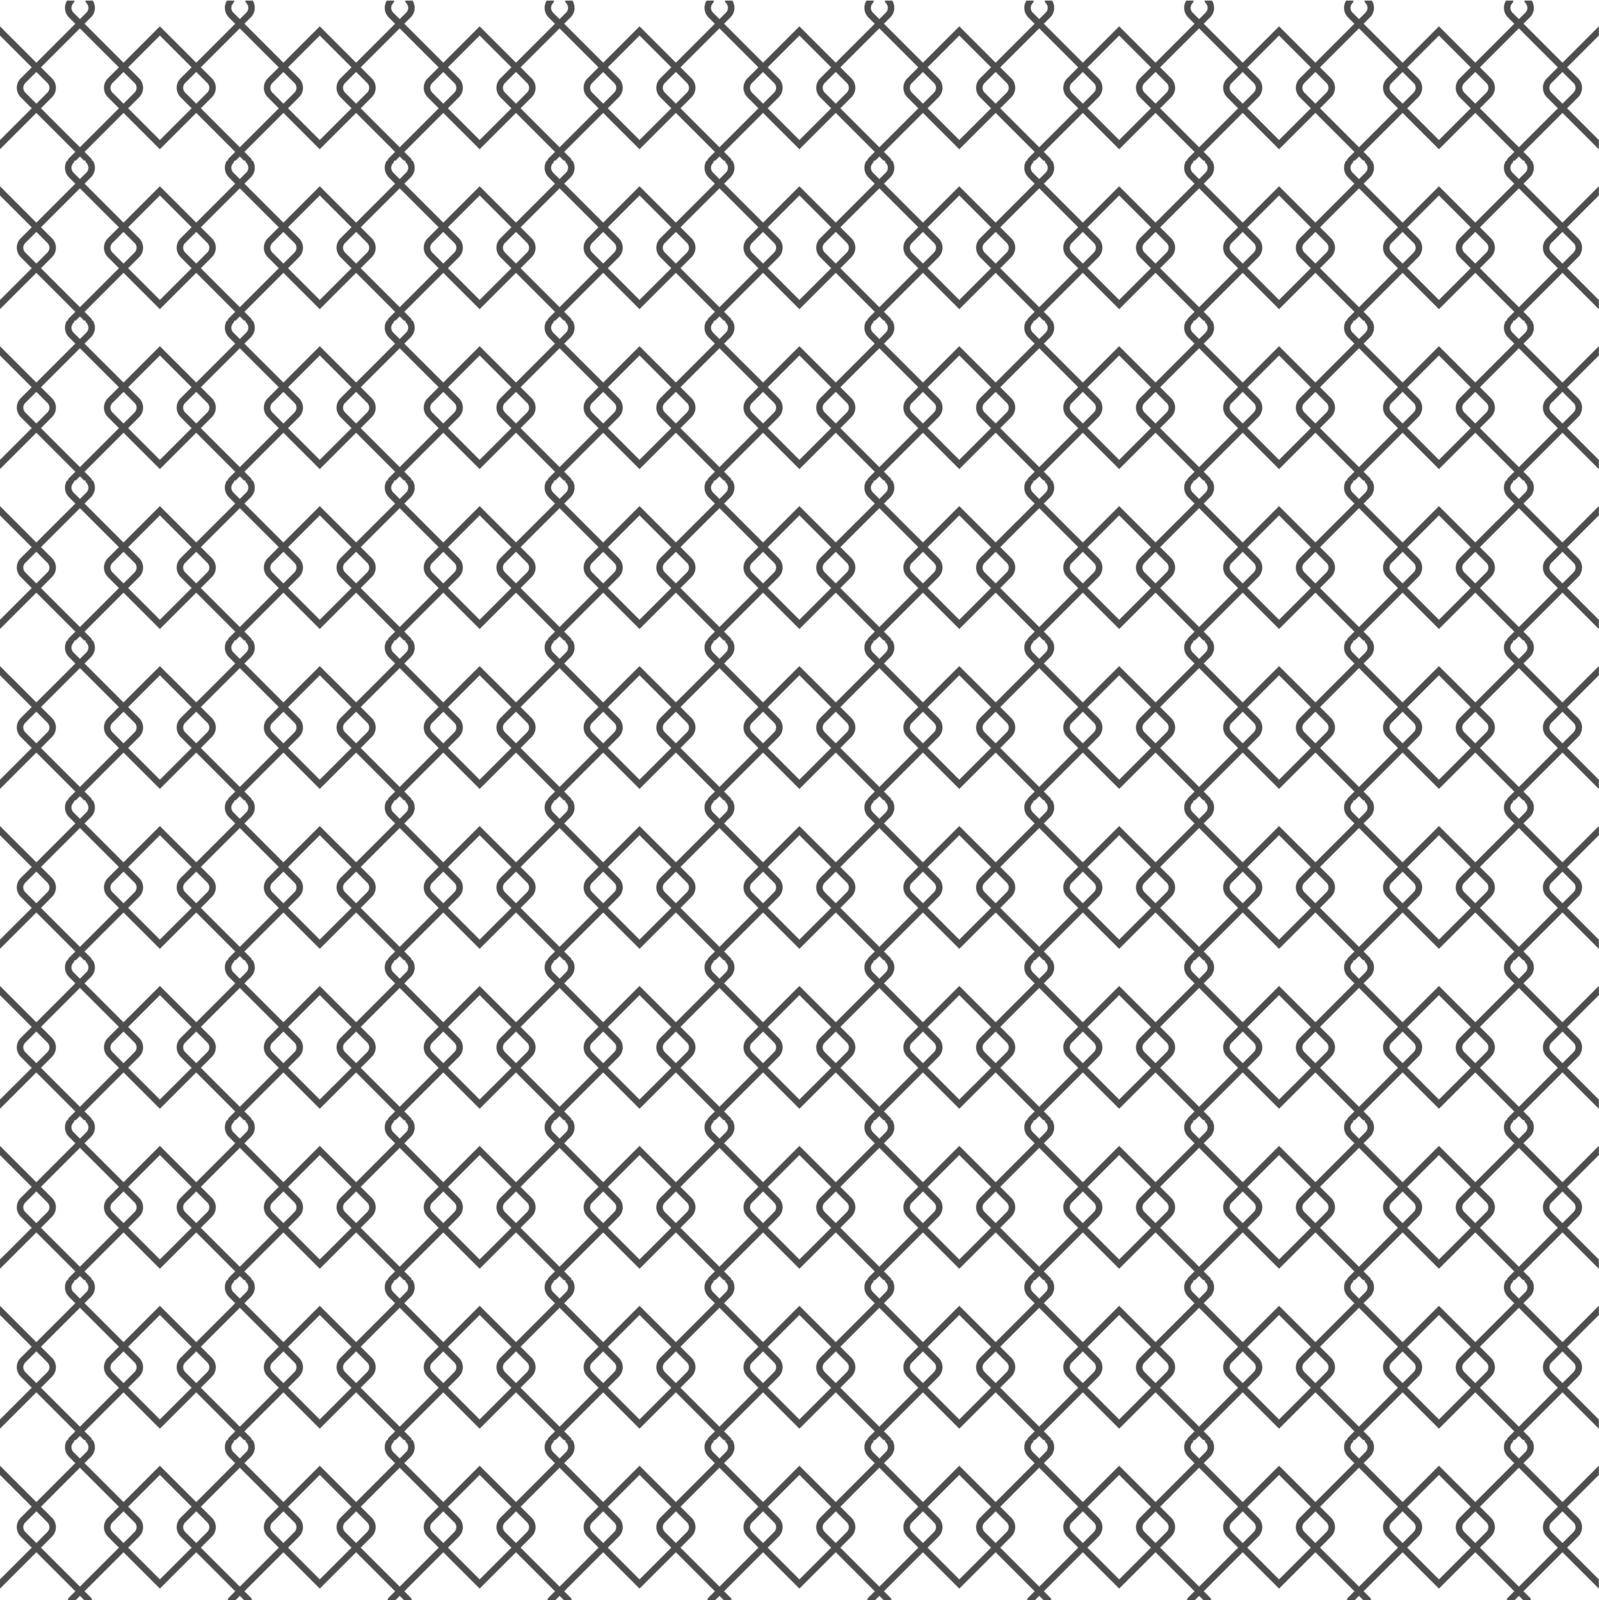 Seamless grid pattern of intersecting lines for texture, textiles and simple backgrounds. Vector illustration